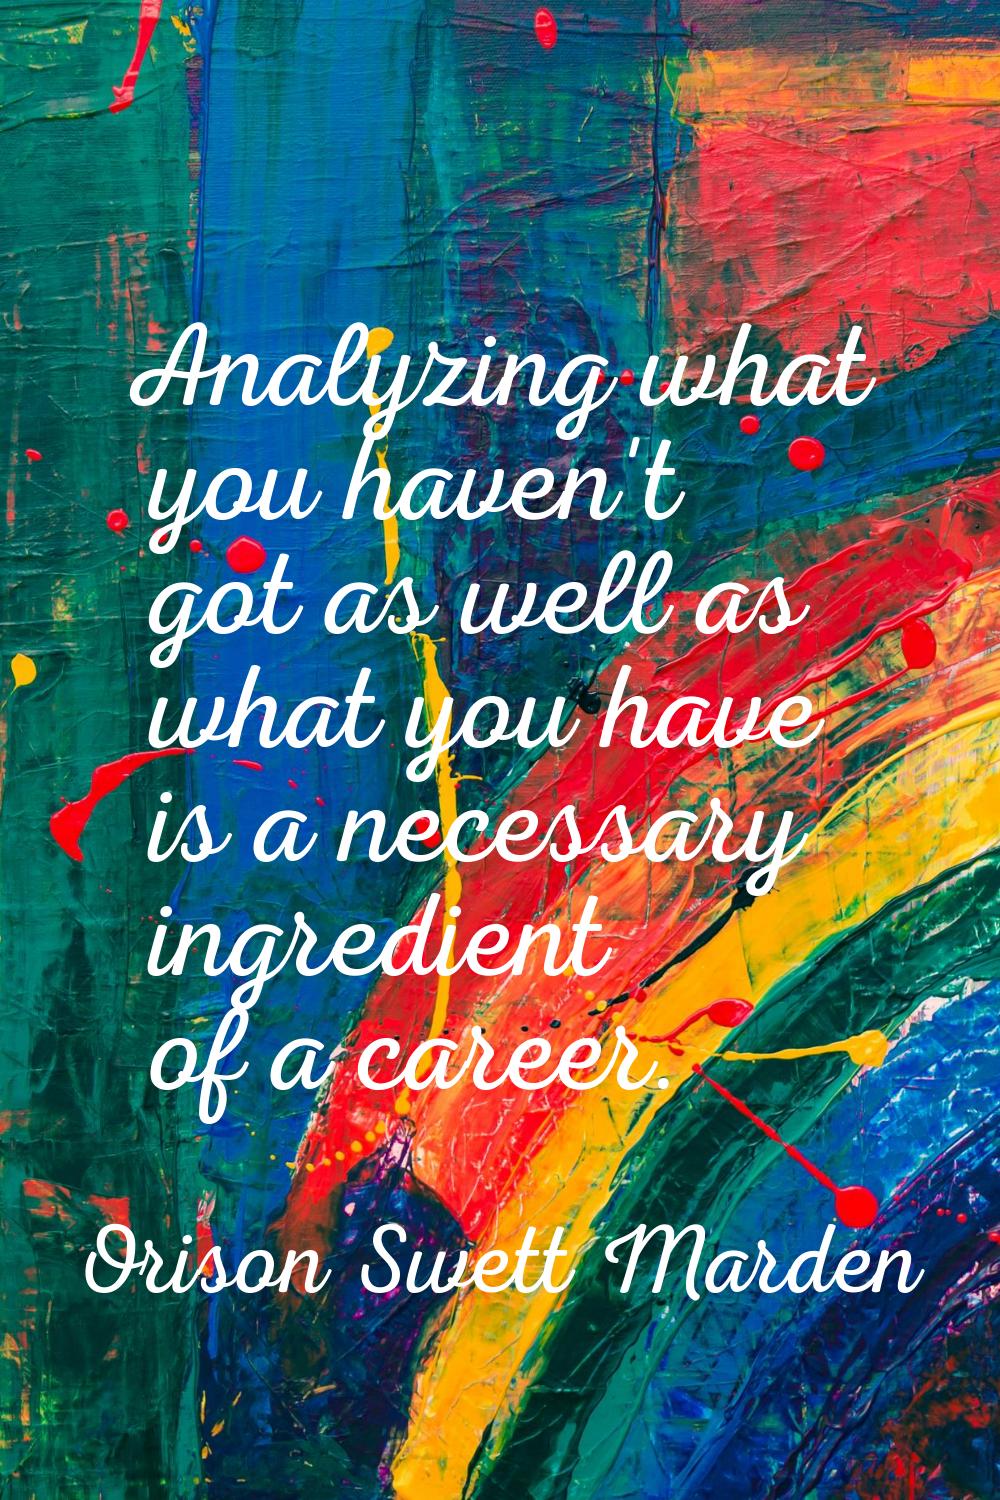 Analyzing what you haven't got as well as what you have is a necessary ingredient of a career.